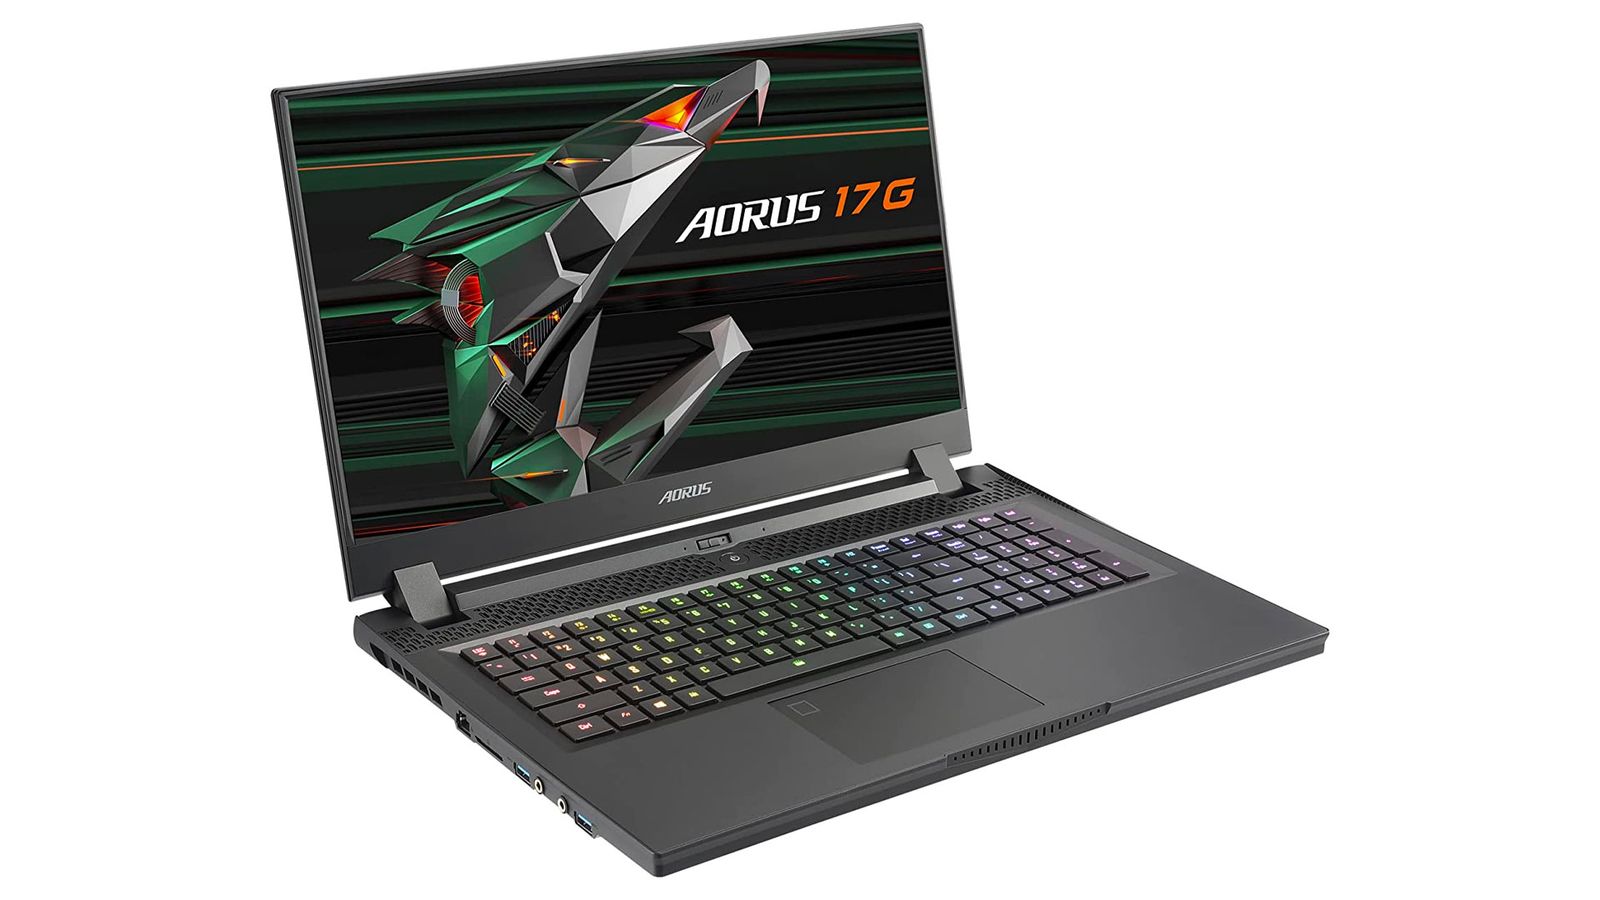 Best laptop for Modern Warfare 2 - Gigabyte AORUS 17G product image of a dark grey laptop with backlit keys and a mech animal on the display.